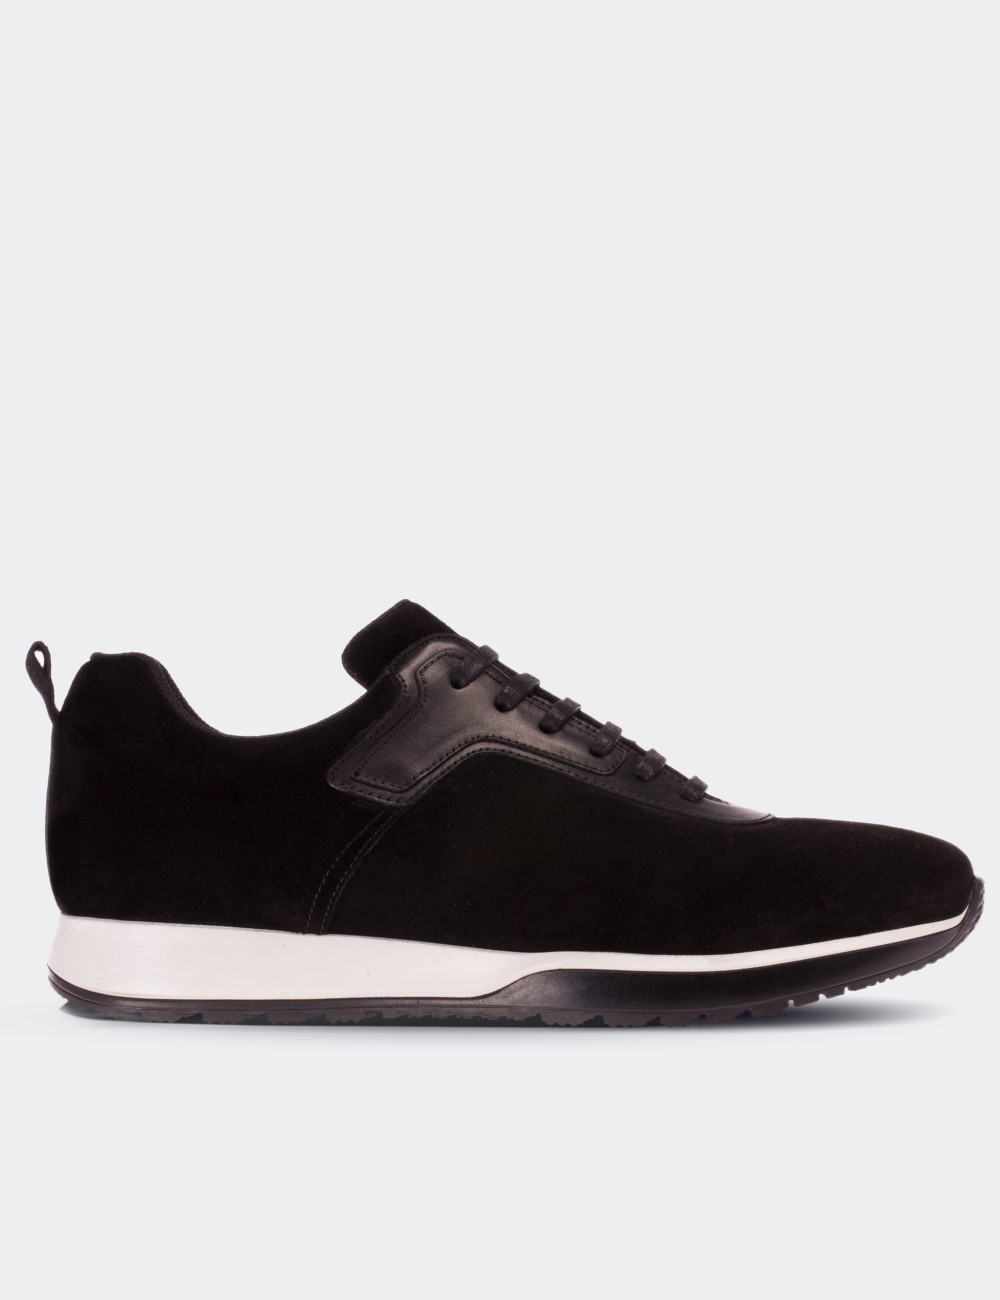 Black Suede Leather Sneakers - 01730MSYHT01